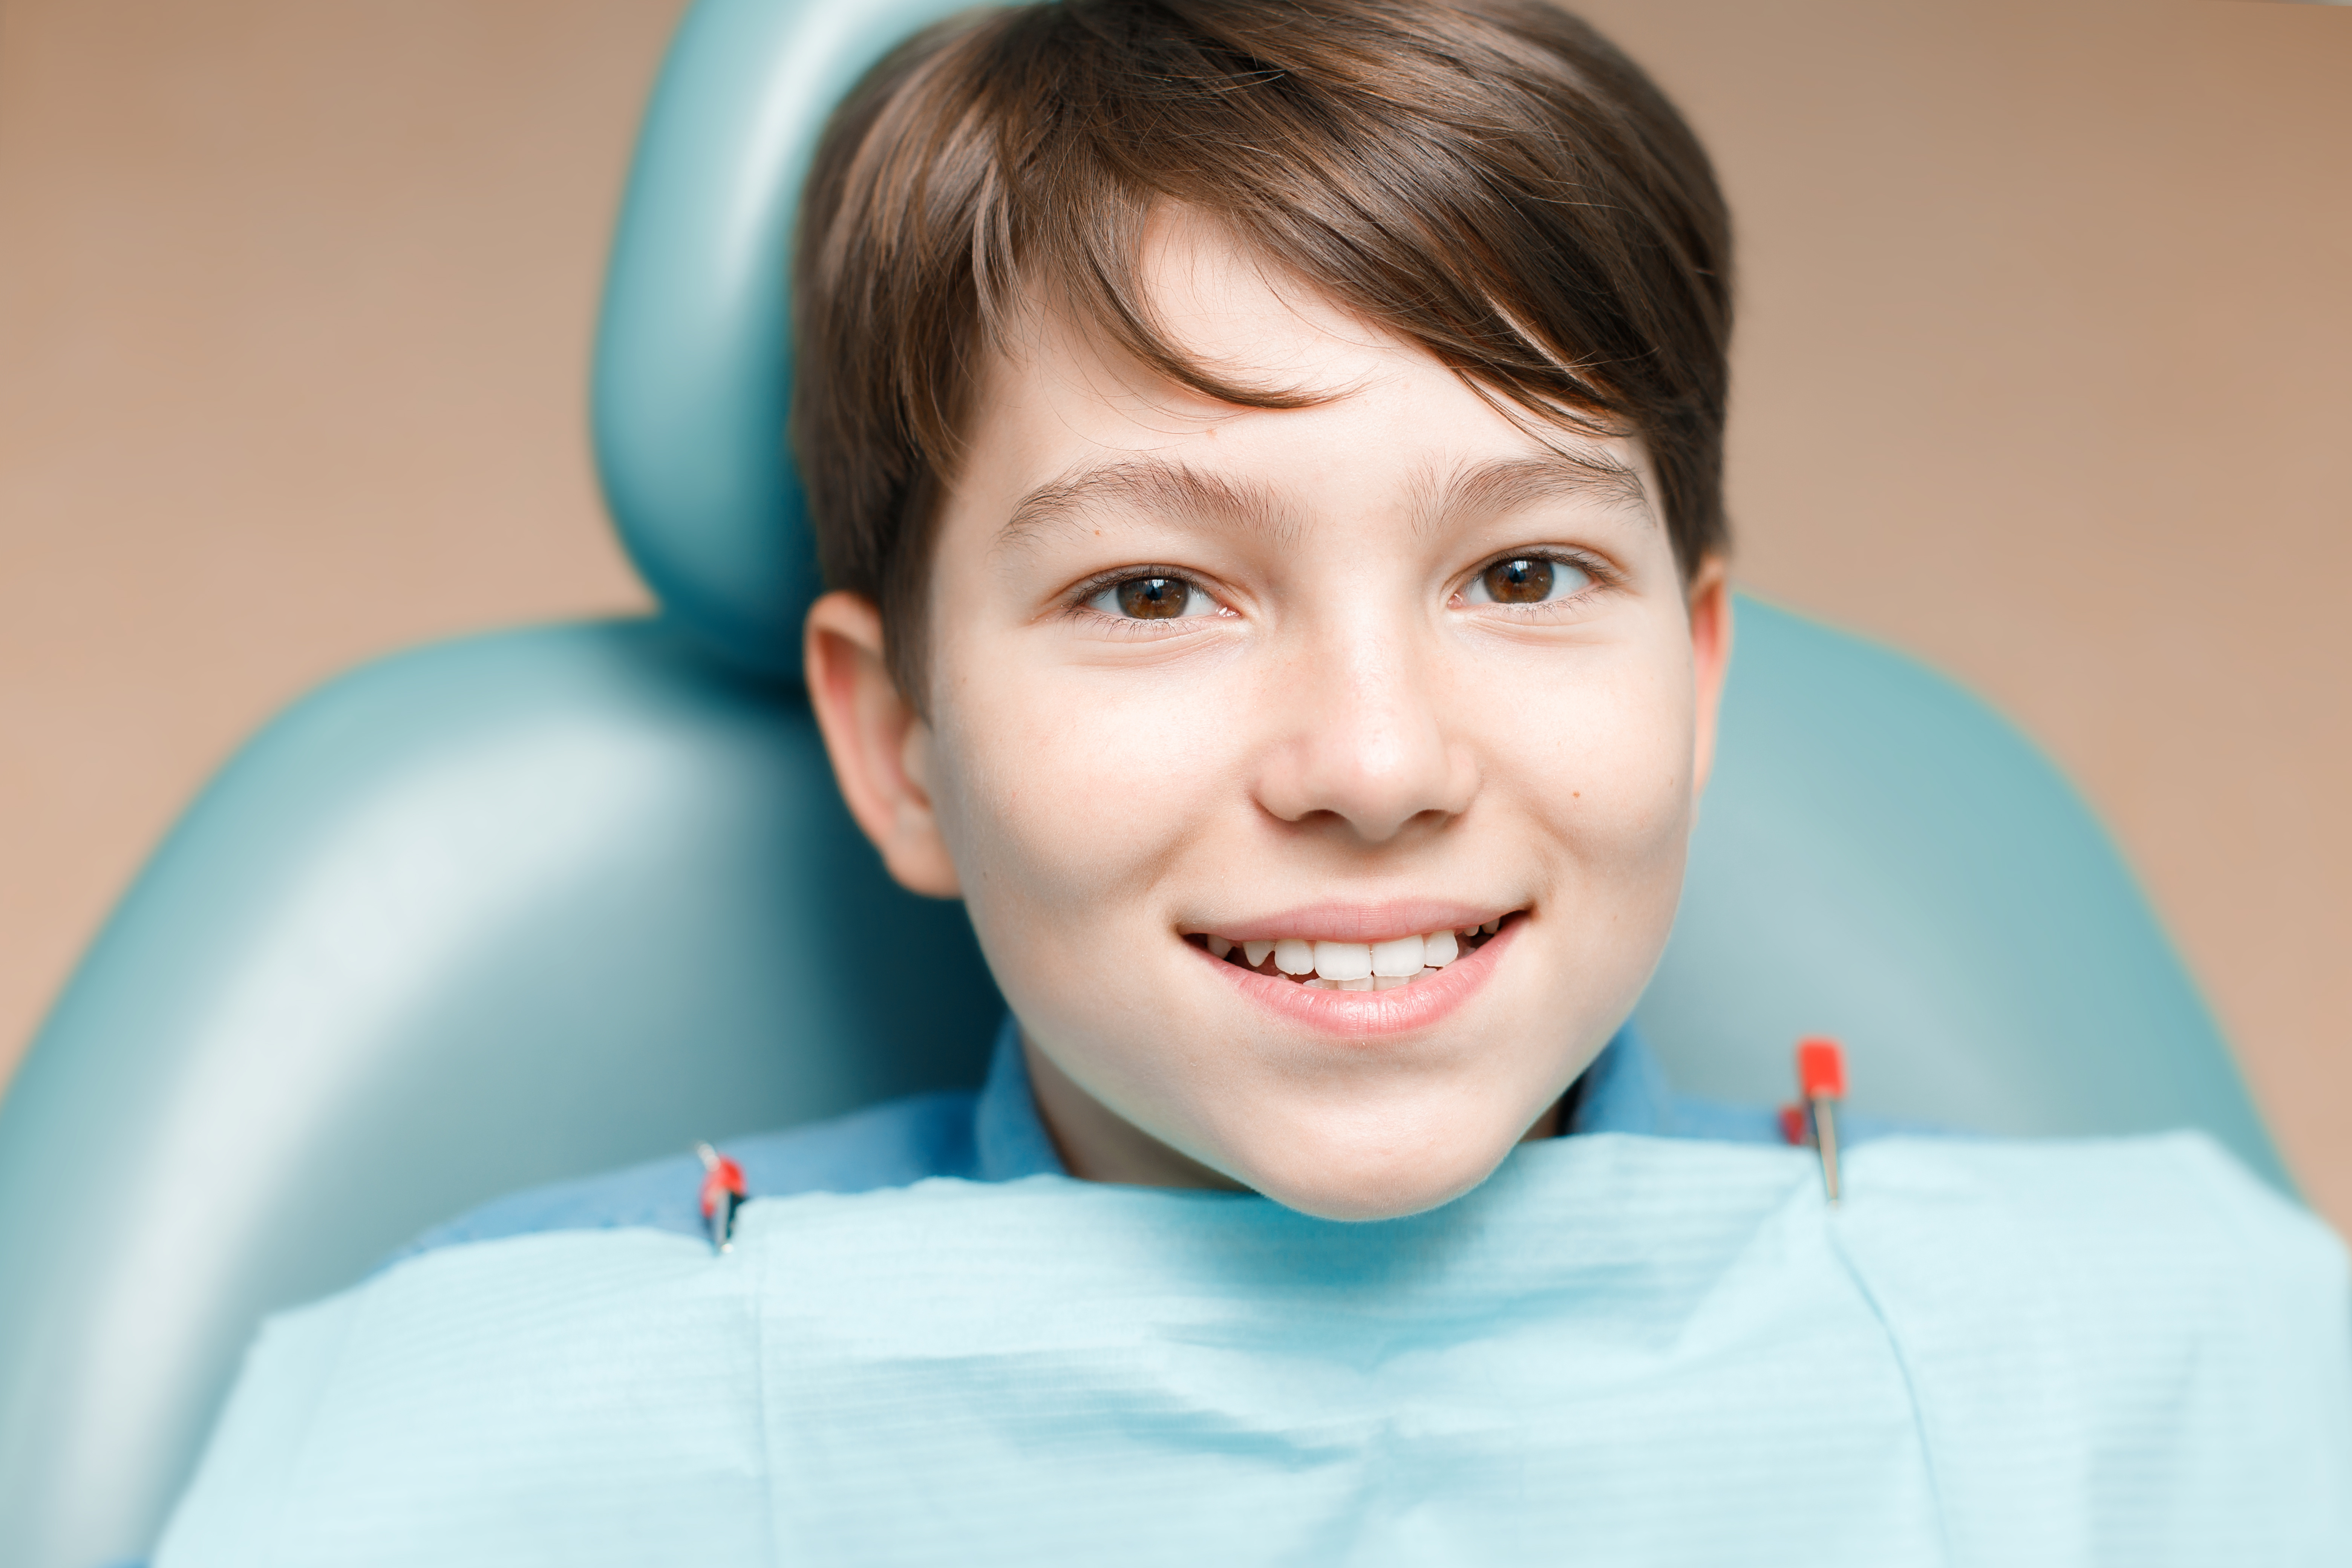 Child happy at dentist's office pediatric dentistry concept